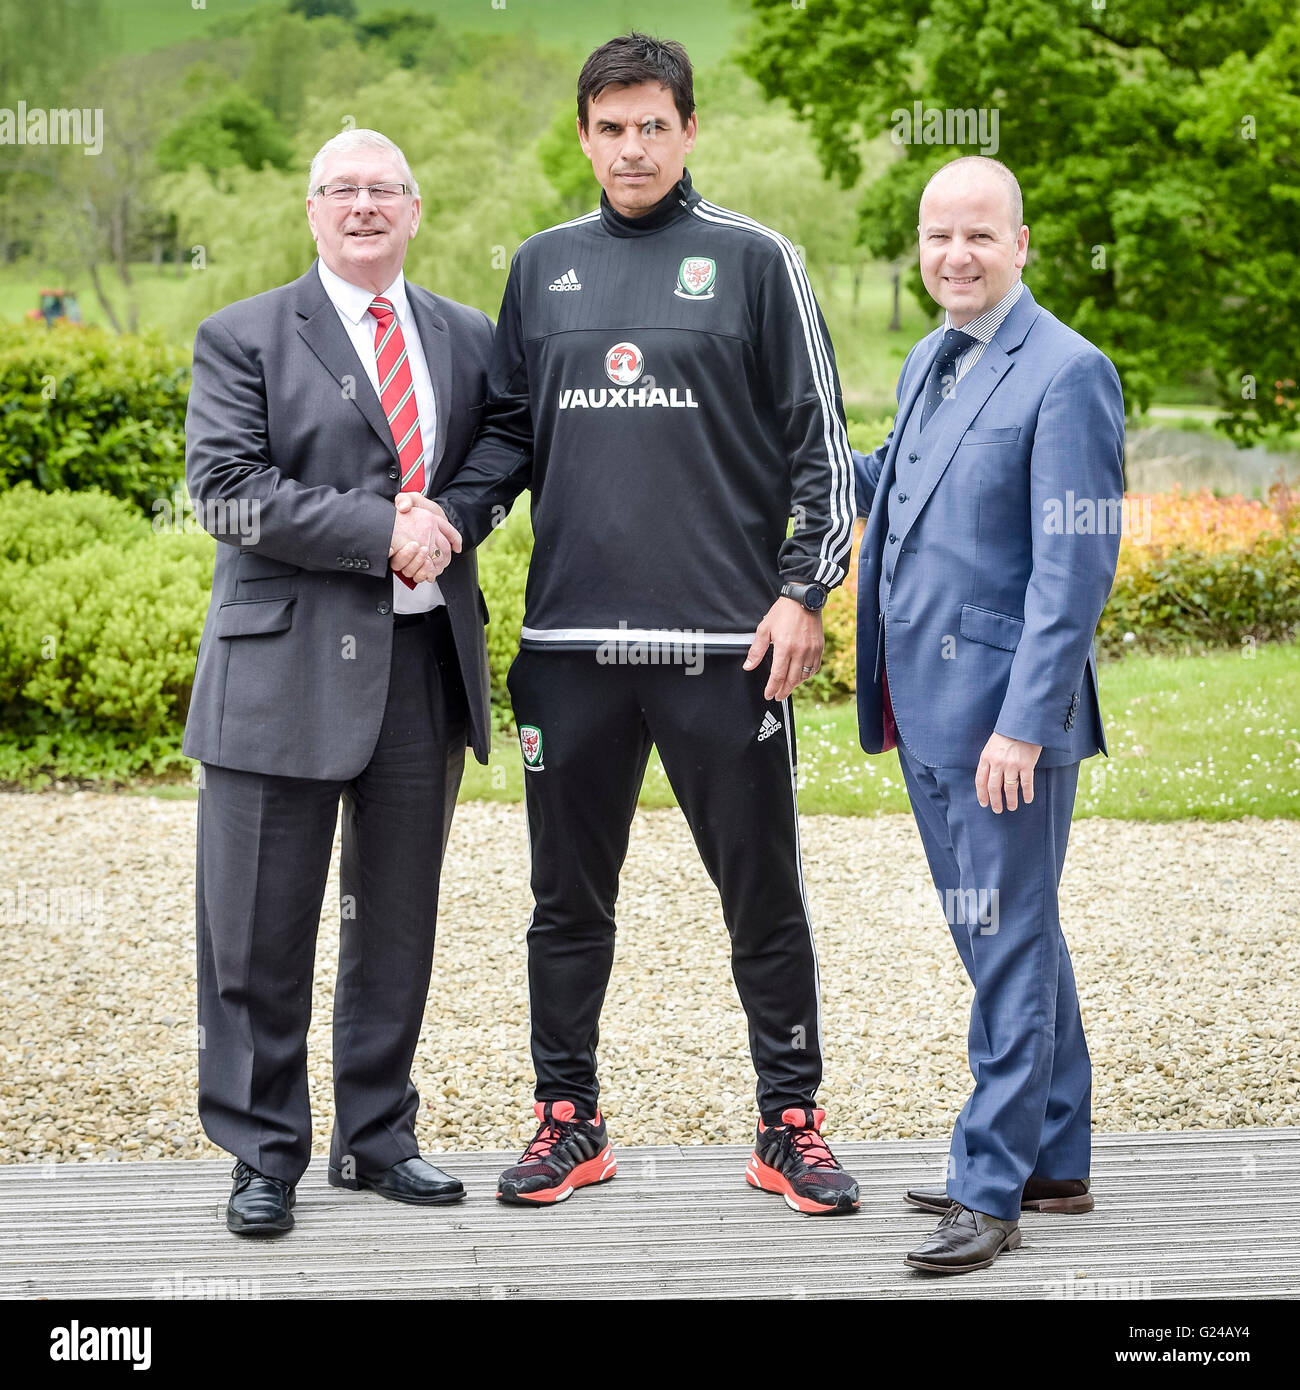 Wales' national football team manager Chris Coleman (centre) shakes hands with Football Association Wales President David Griffiths (left) and Football Association Wales Chief Executive Jonathan Ford after a press conference at The Vale Resort, Hensol. Stock Photo